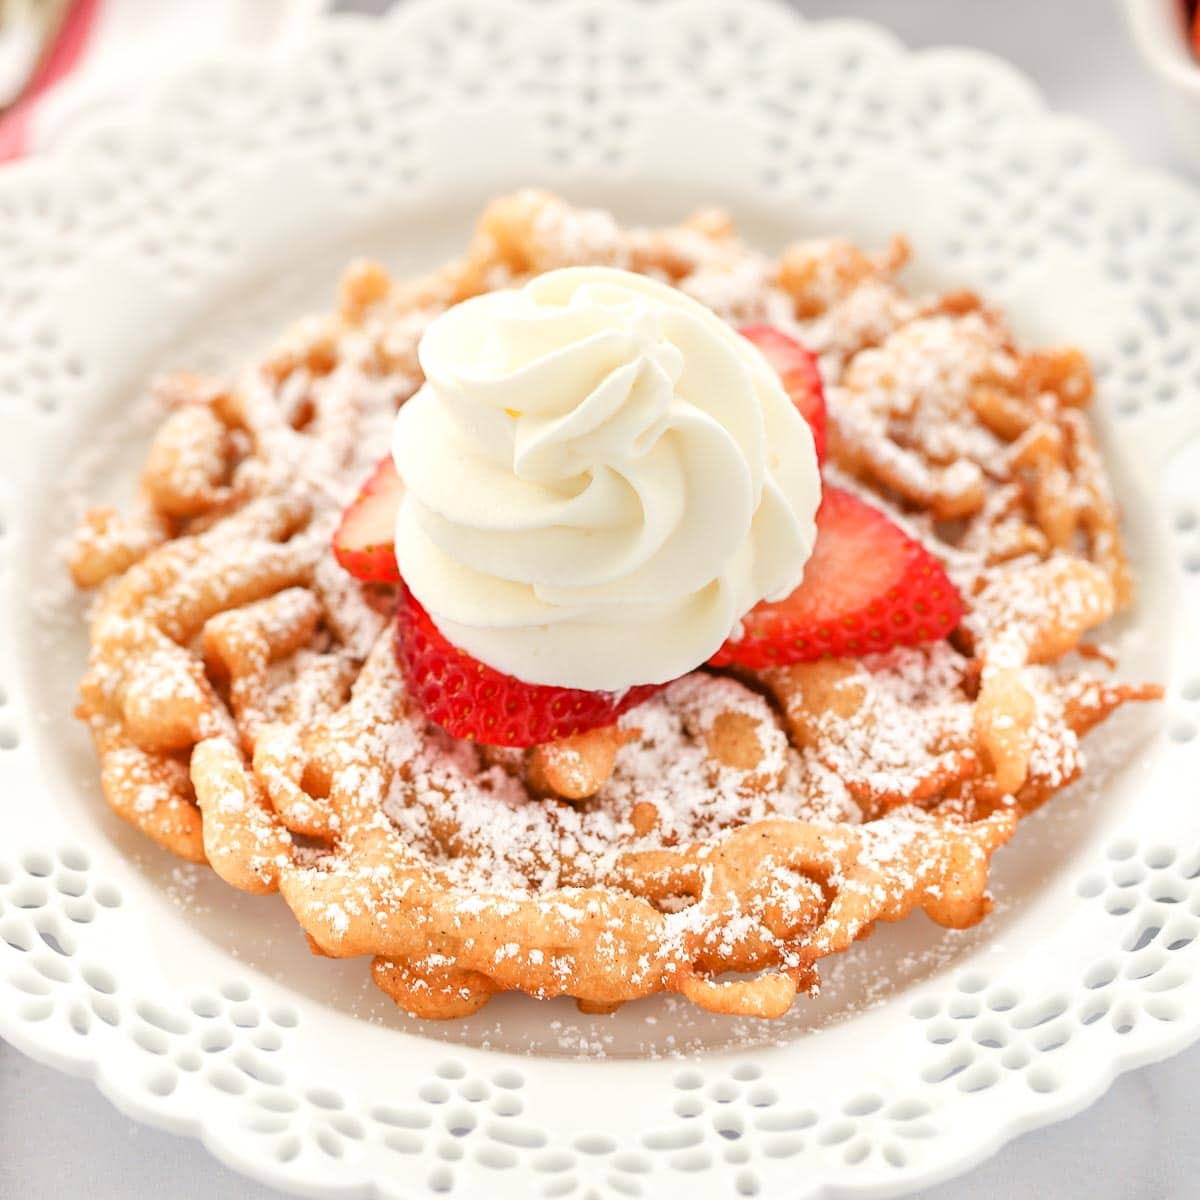 How To Make Funnel Cake Mix At Home